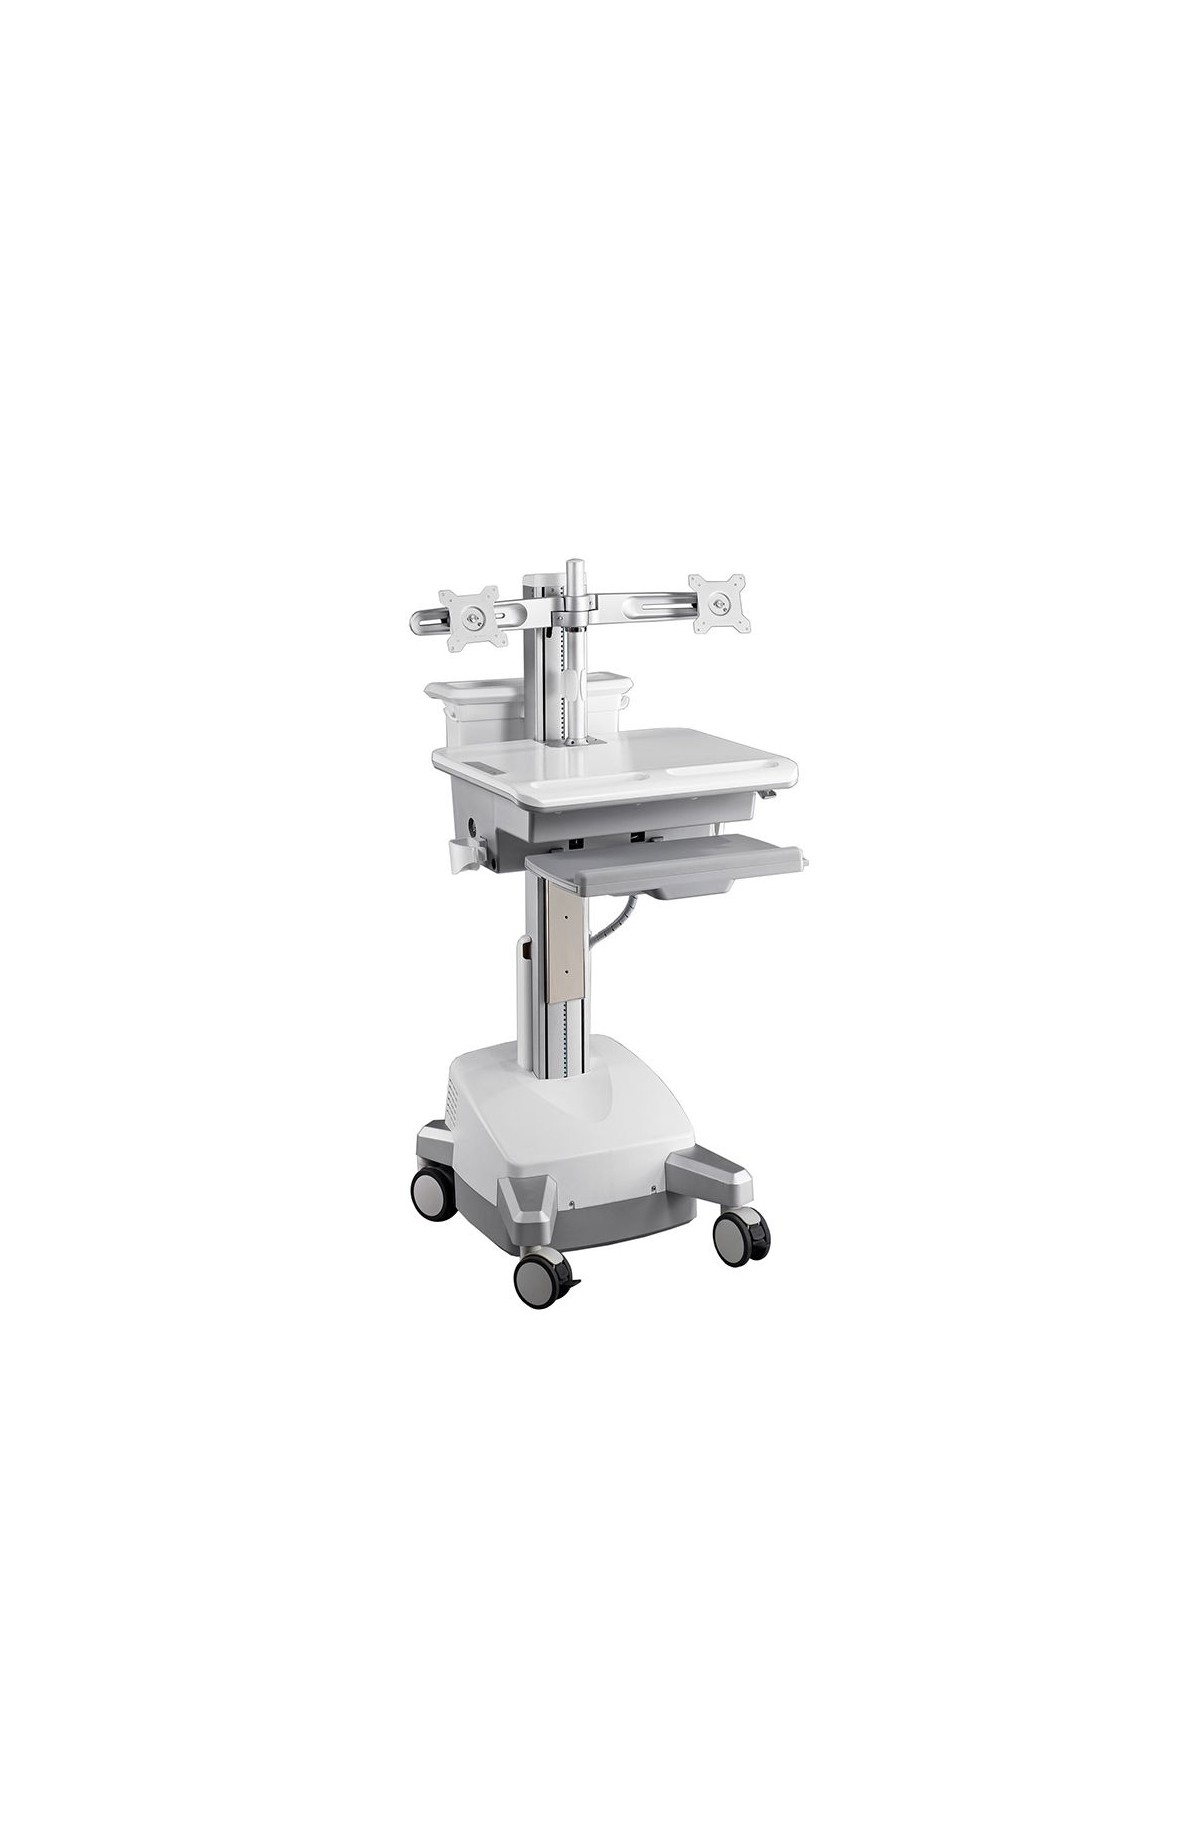 Aavara CMD01 Powered Mobile Medical Cart with Manual LIFT - Dual Monitor type